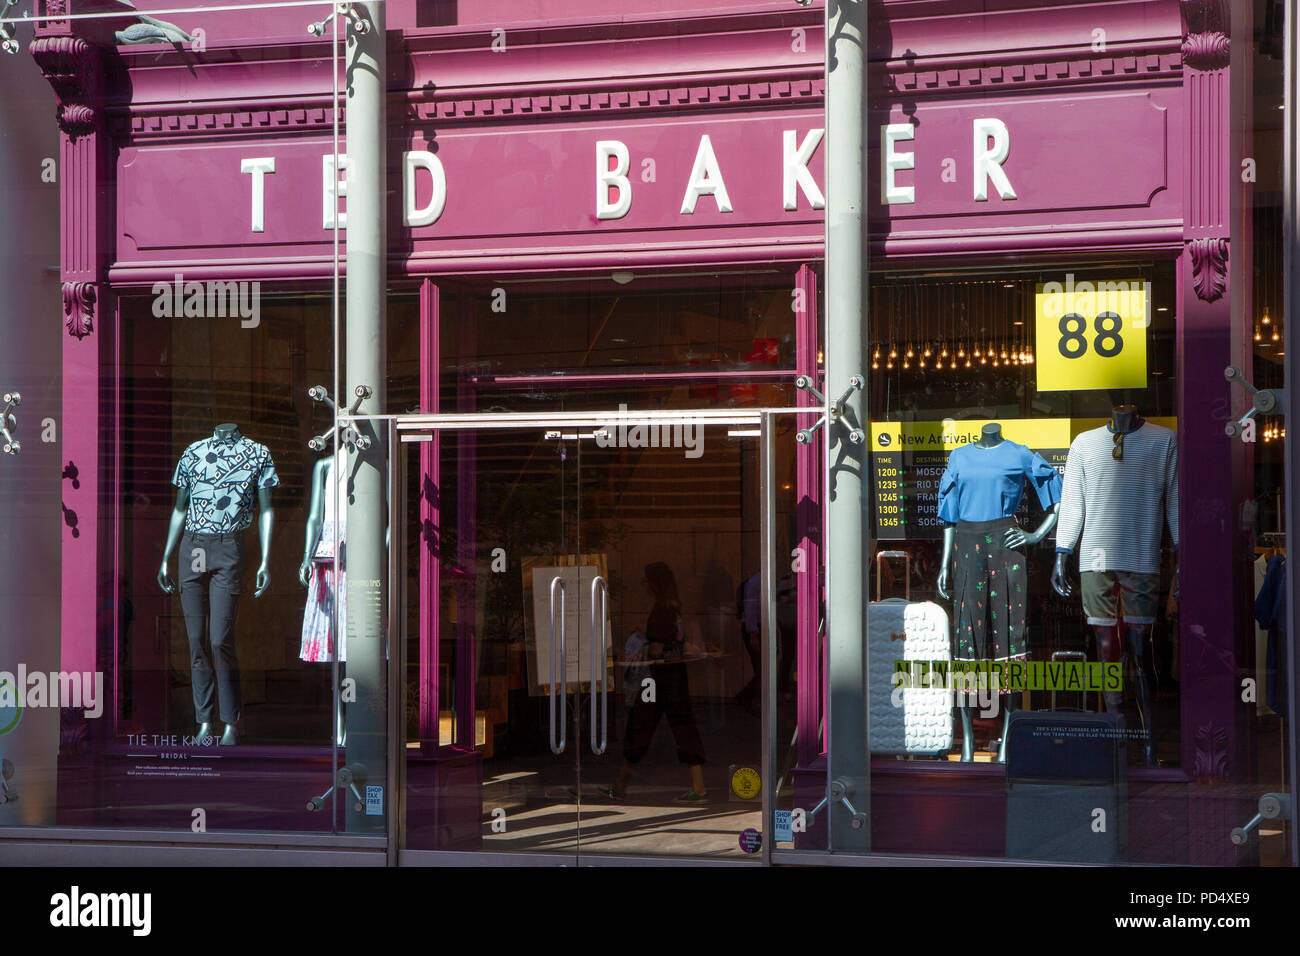 Ted Baker Store auf Neue Cathedral Street, Manchester. Stockfoto